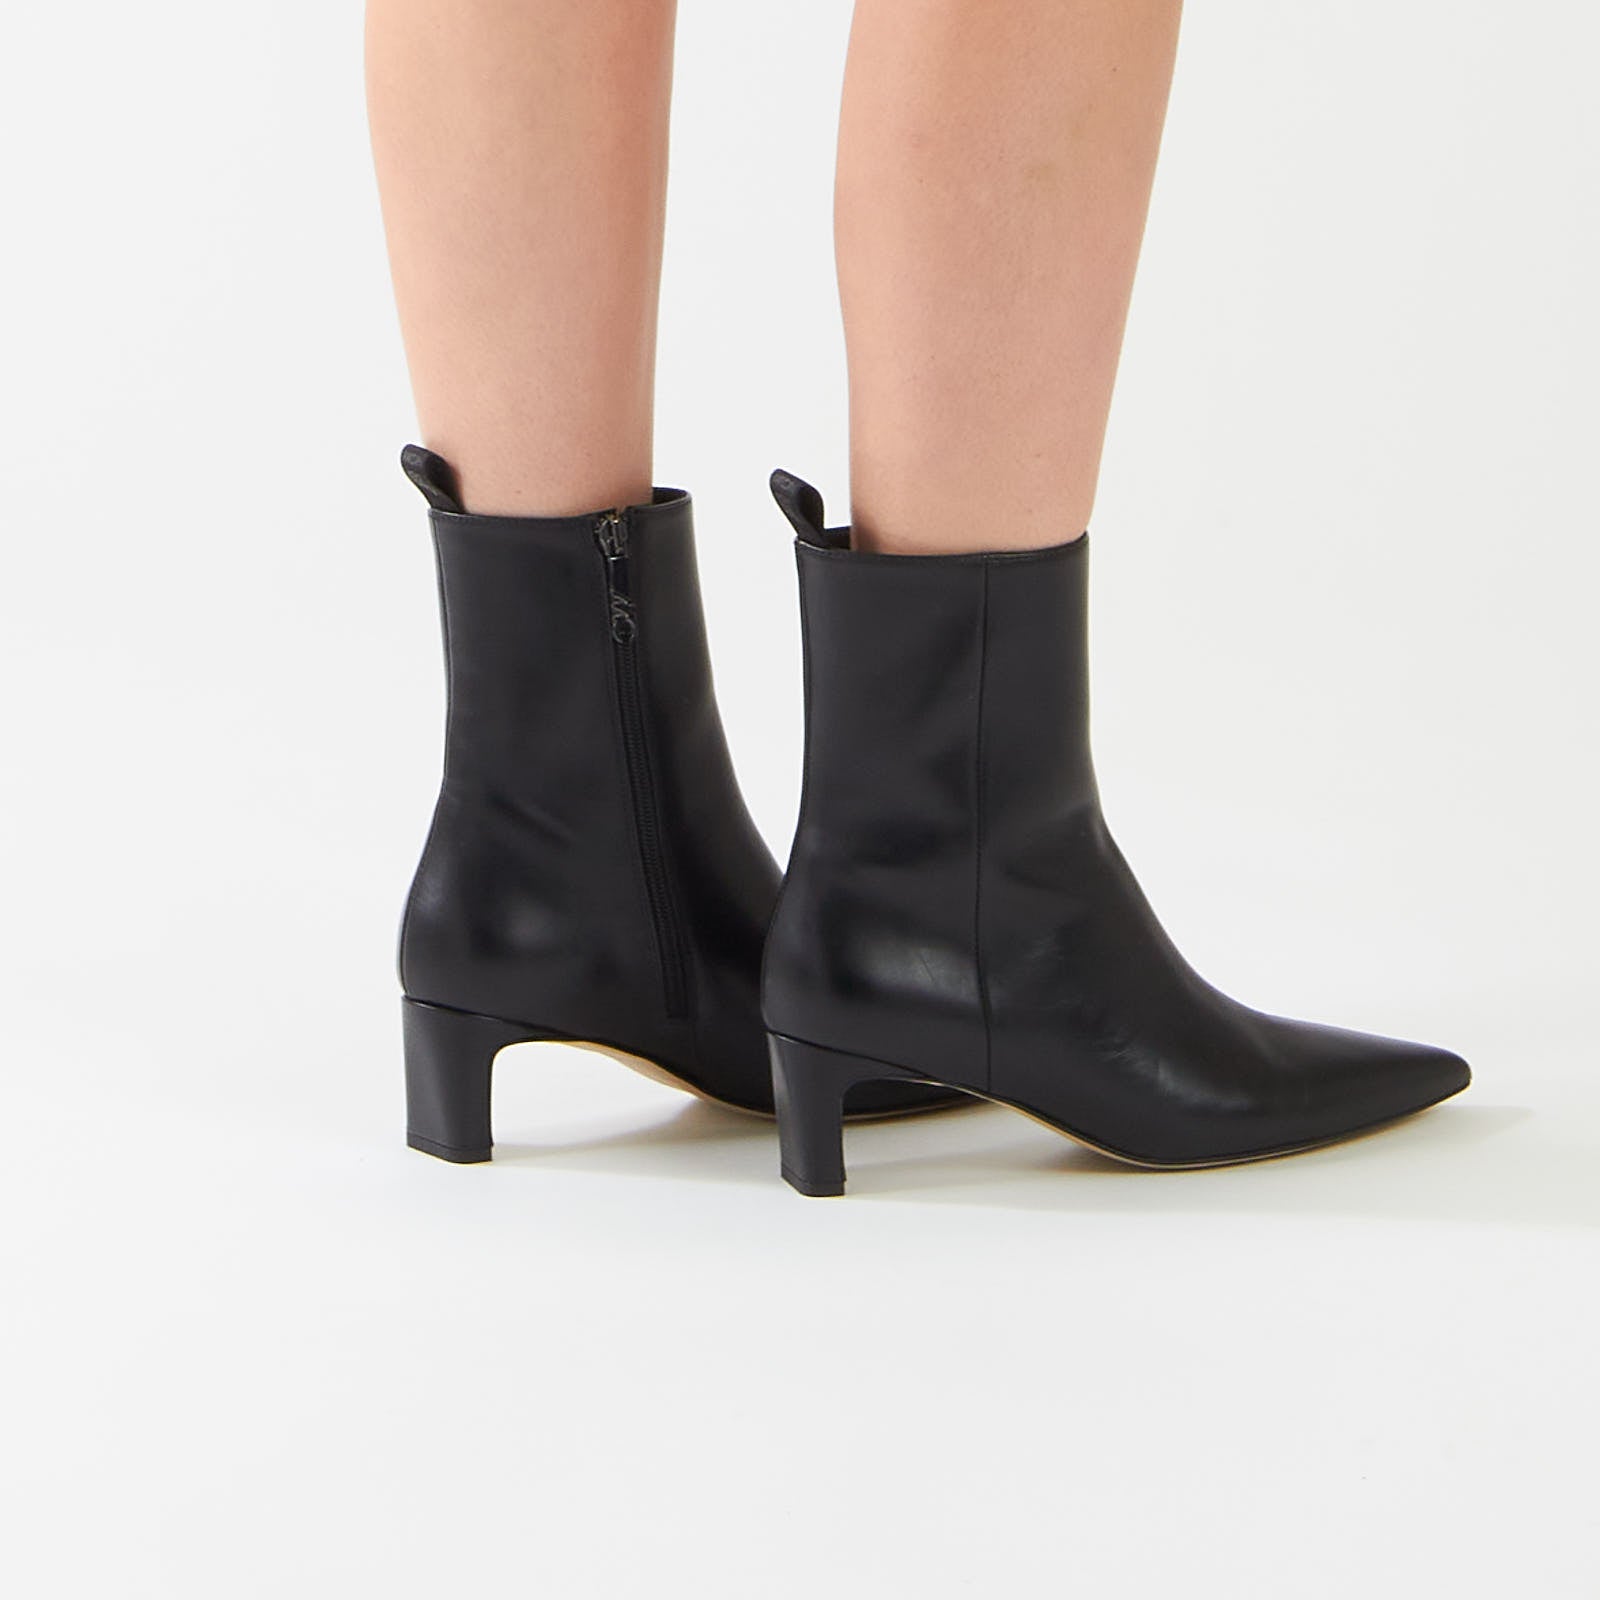 Black Pointed Leather Heeled Boots